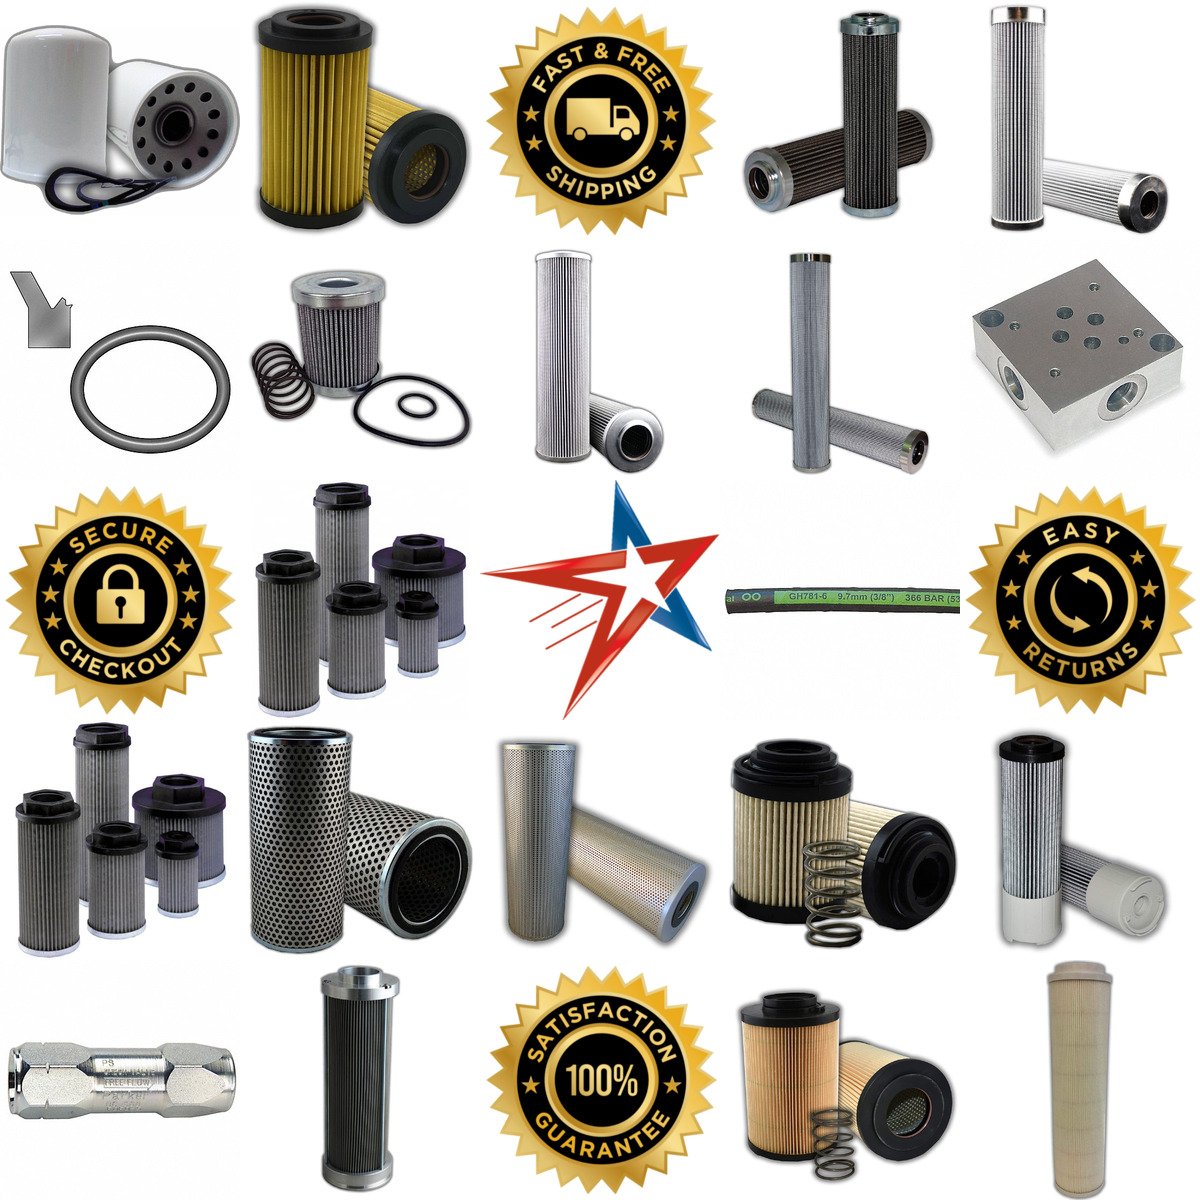 A selection of Hydraulics products on GoVets